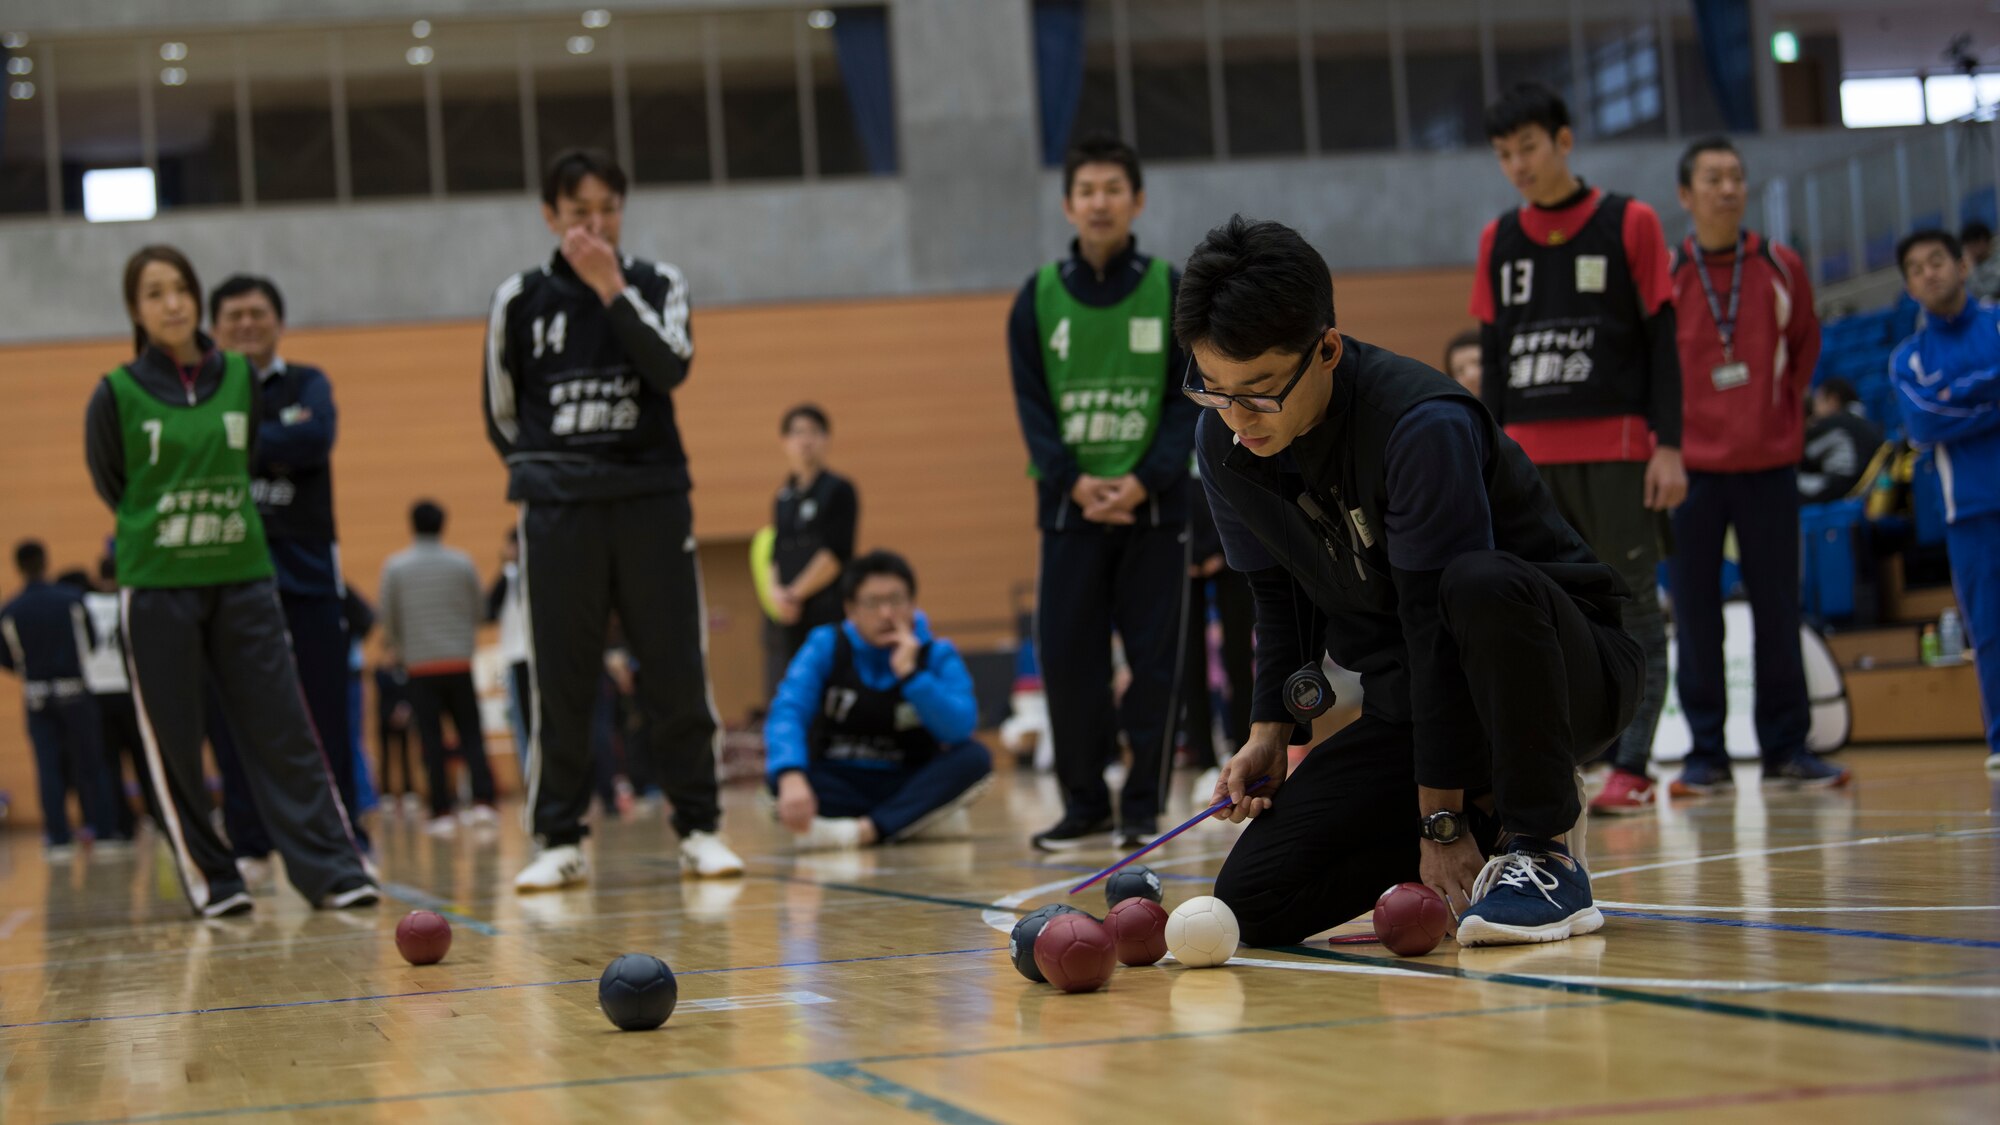 A Paralympics judge measures a hacky sack ball during a game of boccia held at the Misawa International Sports Center in Misawa City, Japan, Dec. 1, 2018. Throughout the day, attendees played goal ball and boccia, which is a tactical game comparable to shuffle board,  as well as wheelchair basketball and sitting volleyball. (U.S. Air Force photo by Airman 1st Class Collette Brooks)